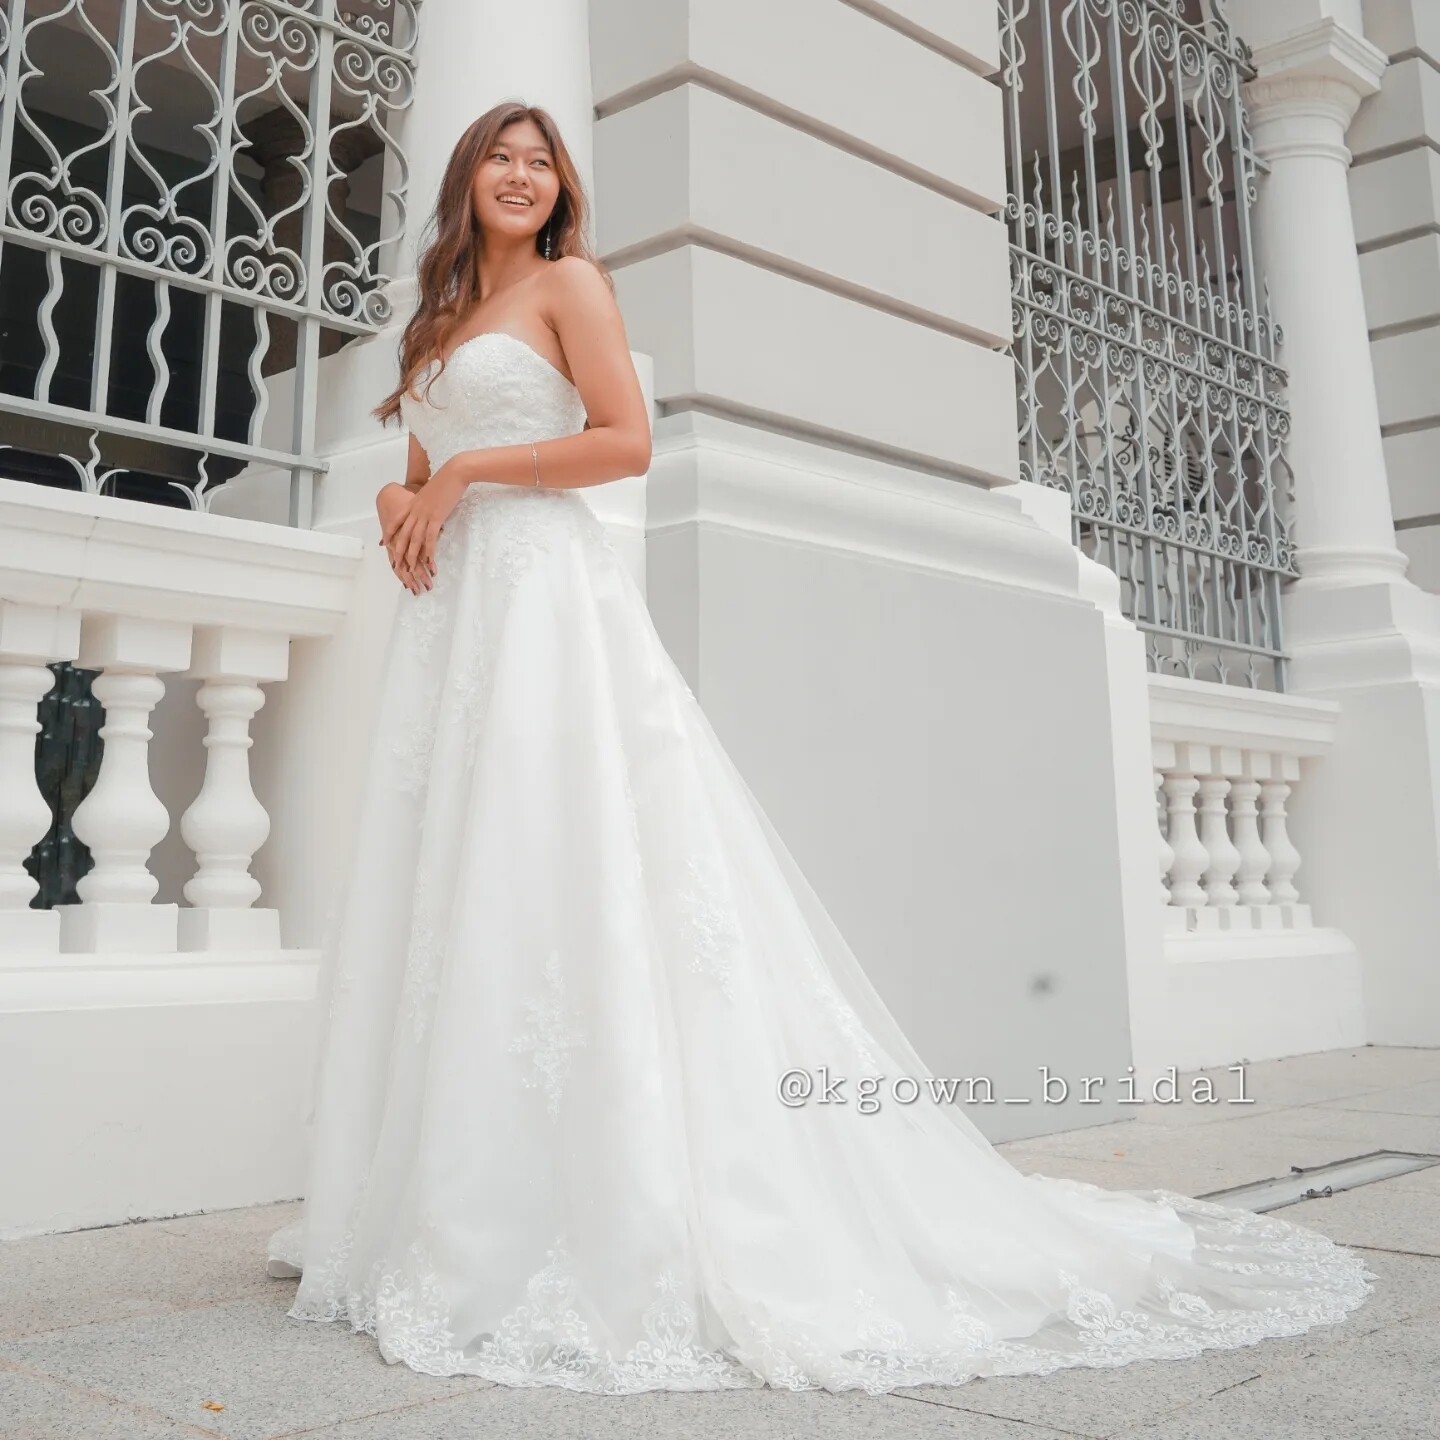 Sweetheart neckline A line wedding dress with lace